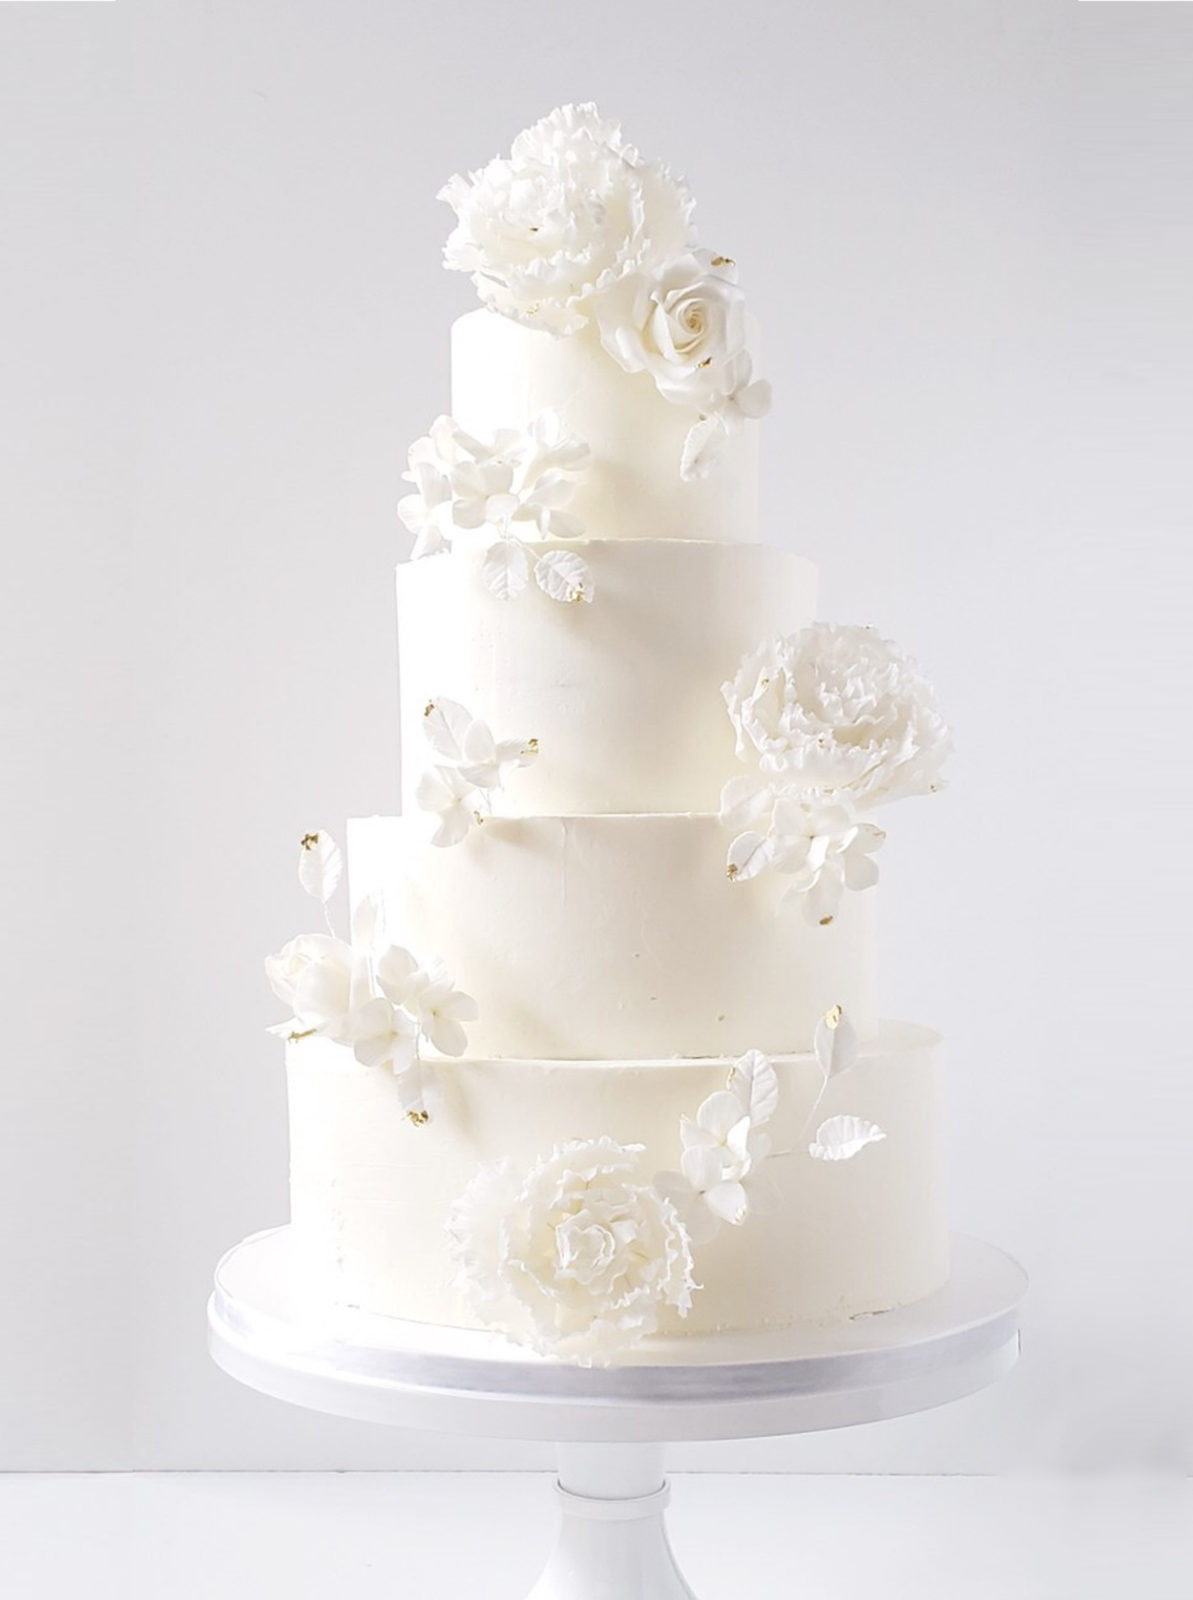 Stunningly delicate monochromatic  show-stopping wedding cake white wedding cake with impossibly romantic handmade sugar flowers